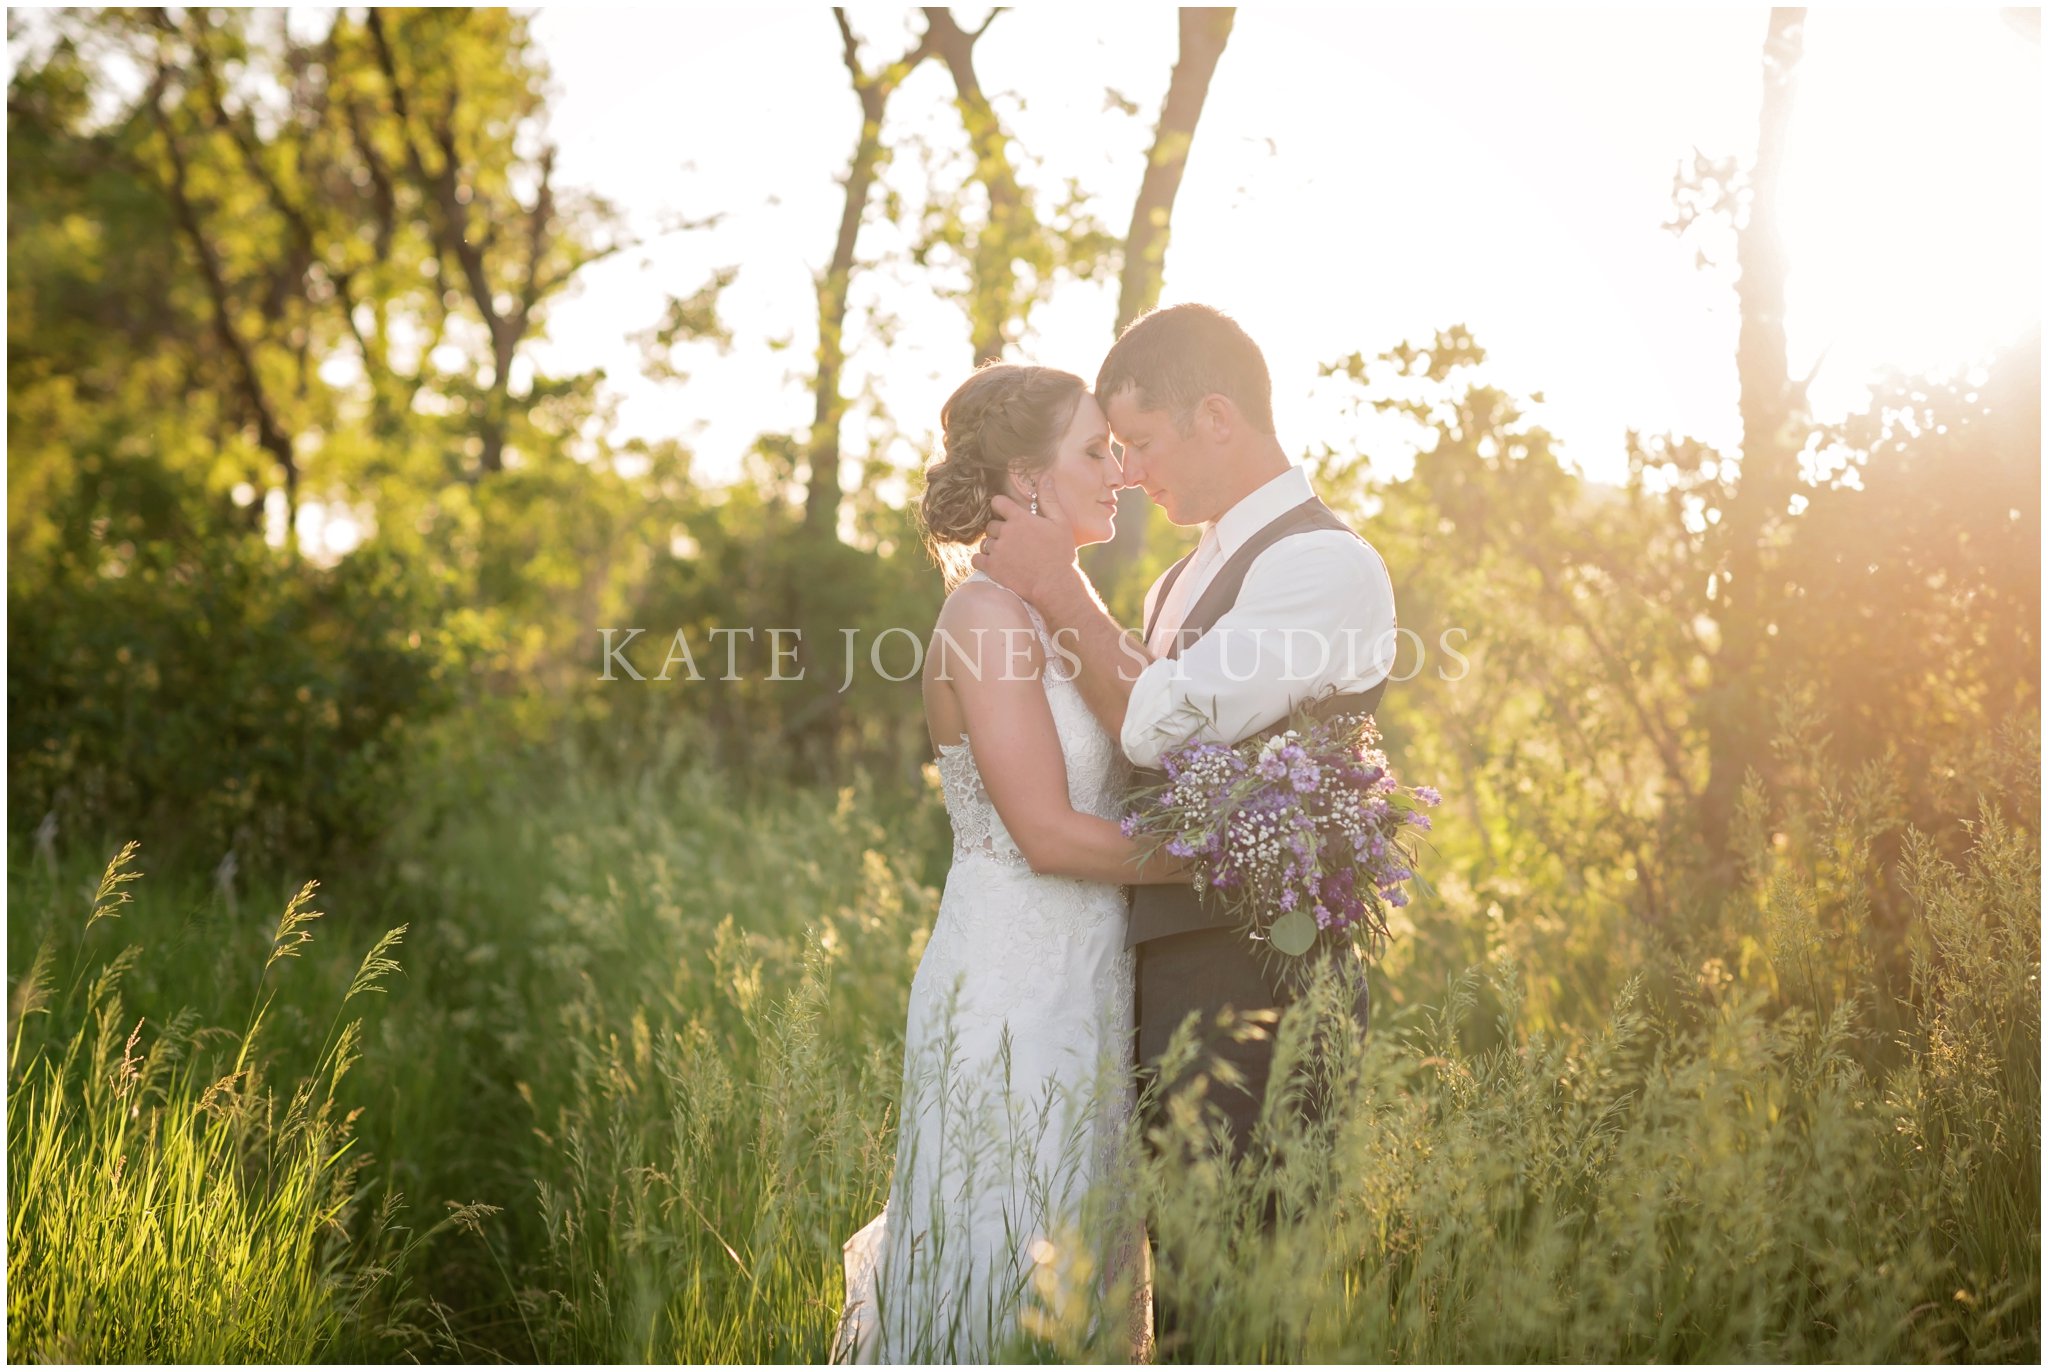 private moment for bride and groom at sunset